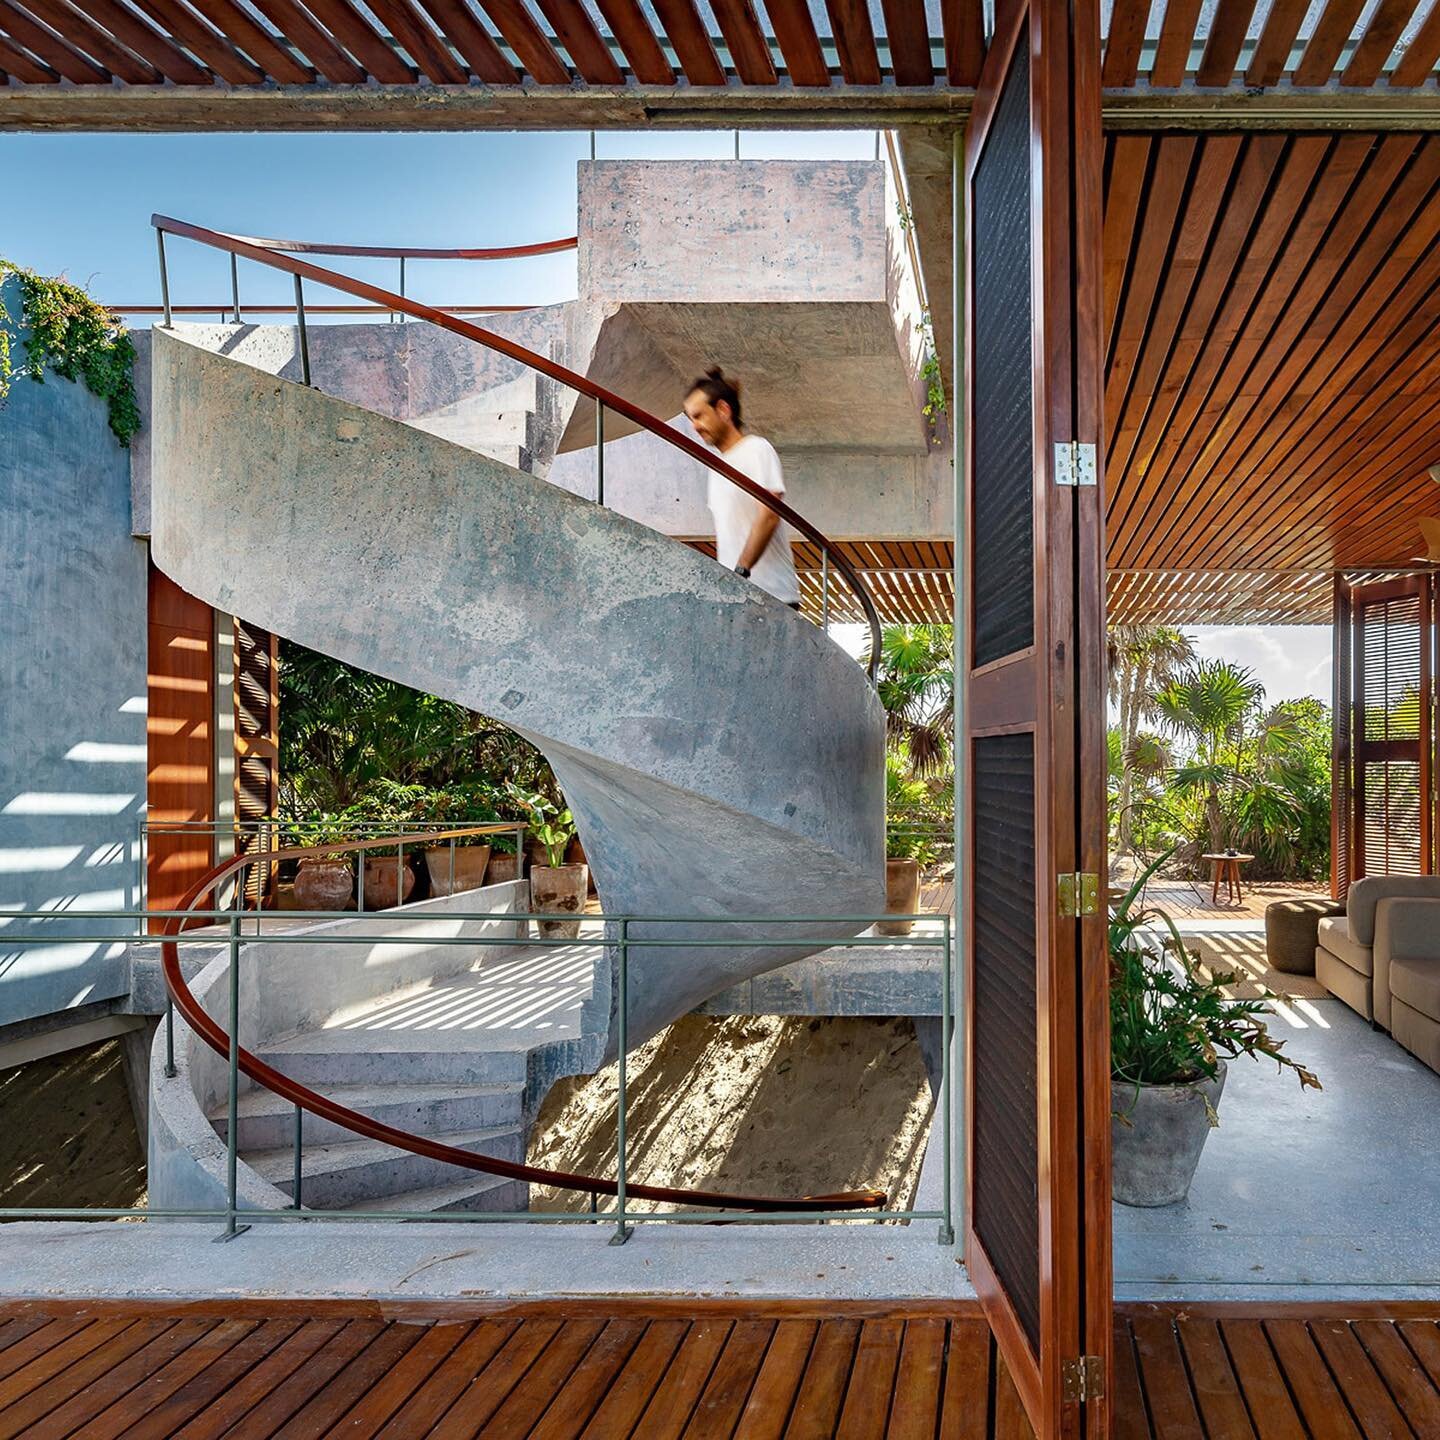 Top 10 staircases of 2020 by @dezeen Which one is your favorite??⁠⁠
⁠⁠
1. Casa Bautista - Tulum, M&eacute;xico⁠⁠
2. House LG - Tuscany, Italy⁠⁠
3. Off-Whte Flagship - Miami, USA⁠⁠
4. Ap&aacute;n - Hidalgo, M&eacute;xico⁠⁠
5. Wohnregal - Berlin, Germa